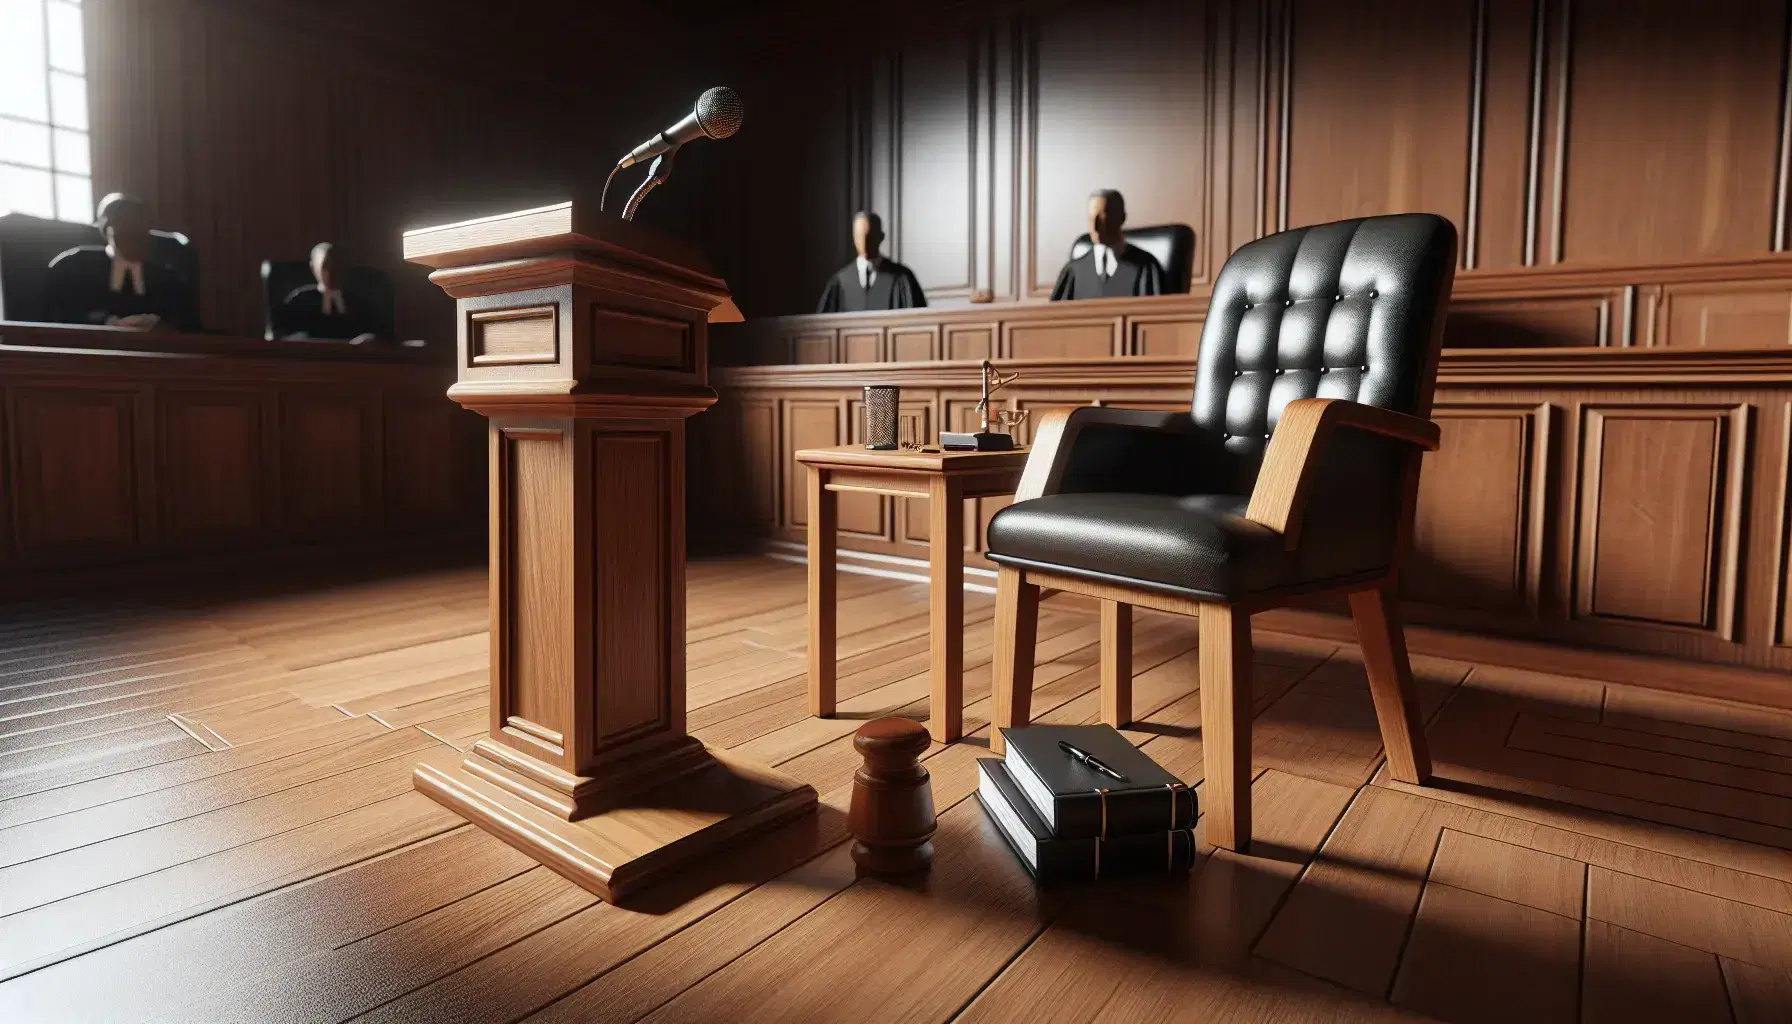 Courtroom with wooden witness stand and microphone, black leather chair, lawyer table with binders and notebook, judge's bench in background.